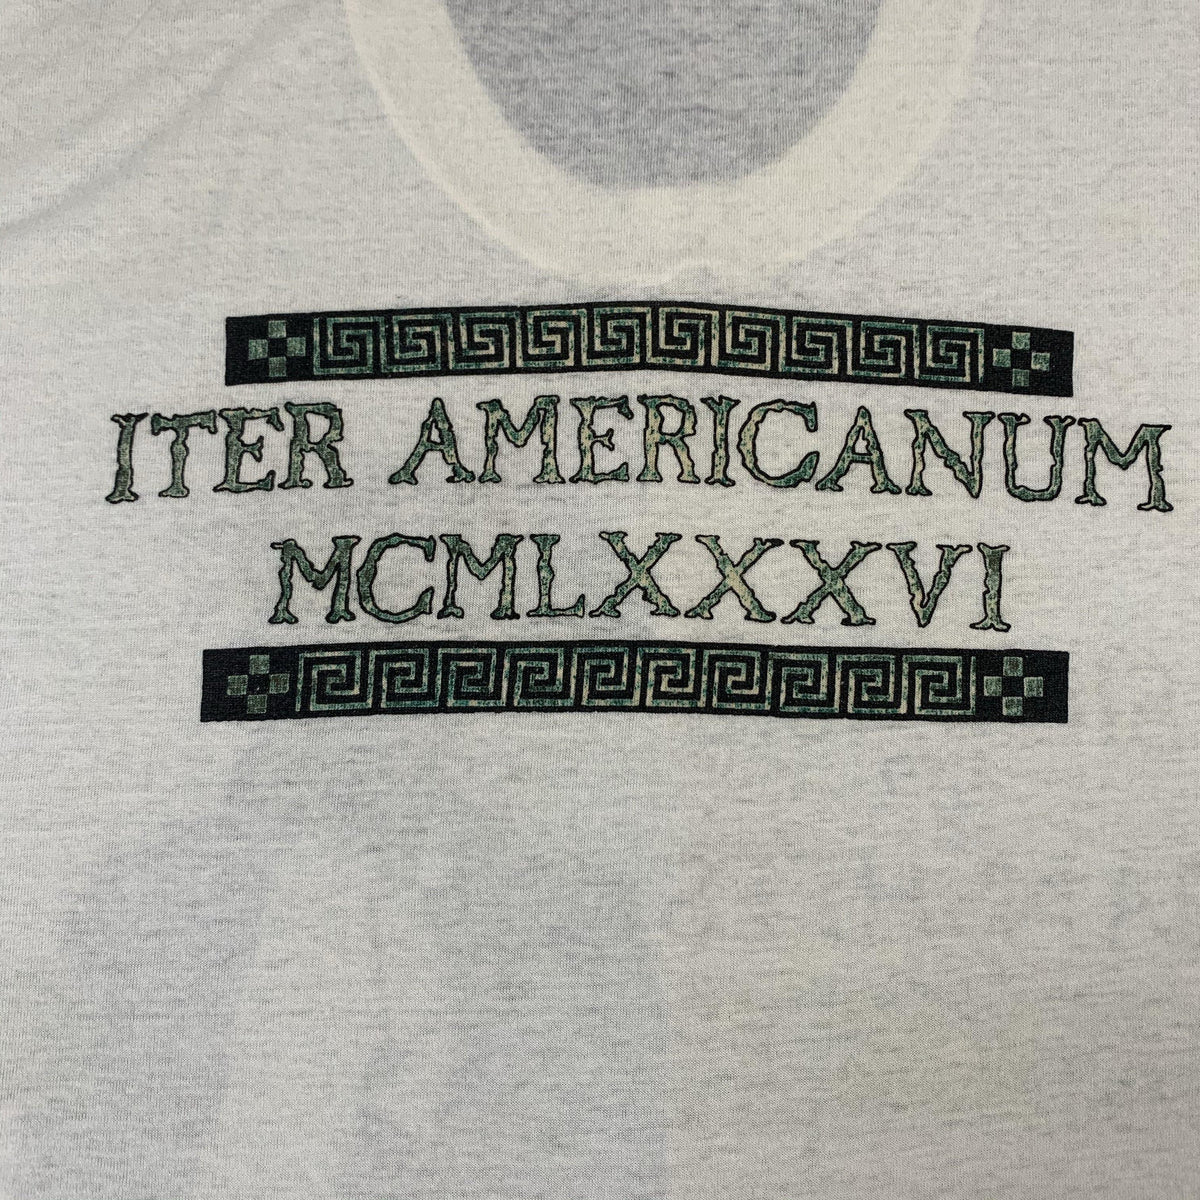 Vintage Siouxsie And The Banshees “Iter Americanum” T-Shirt - jointcustodydc